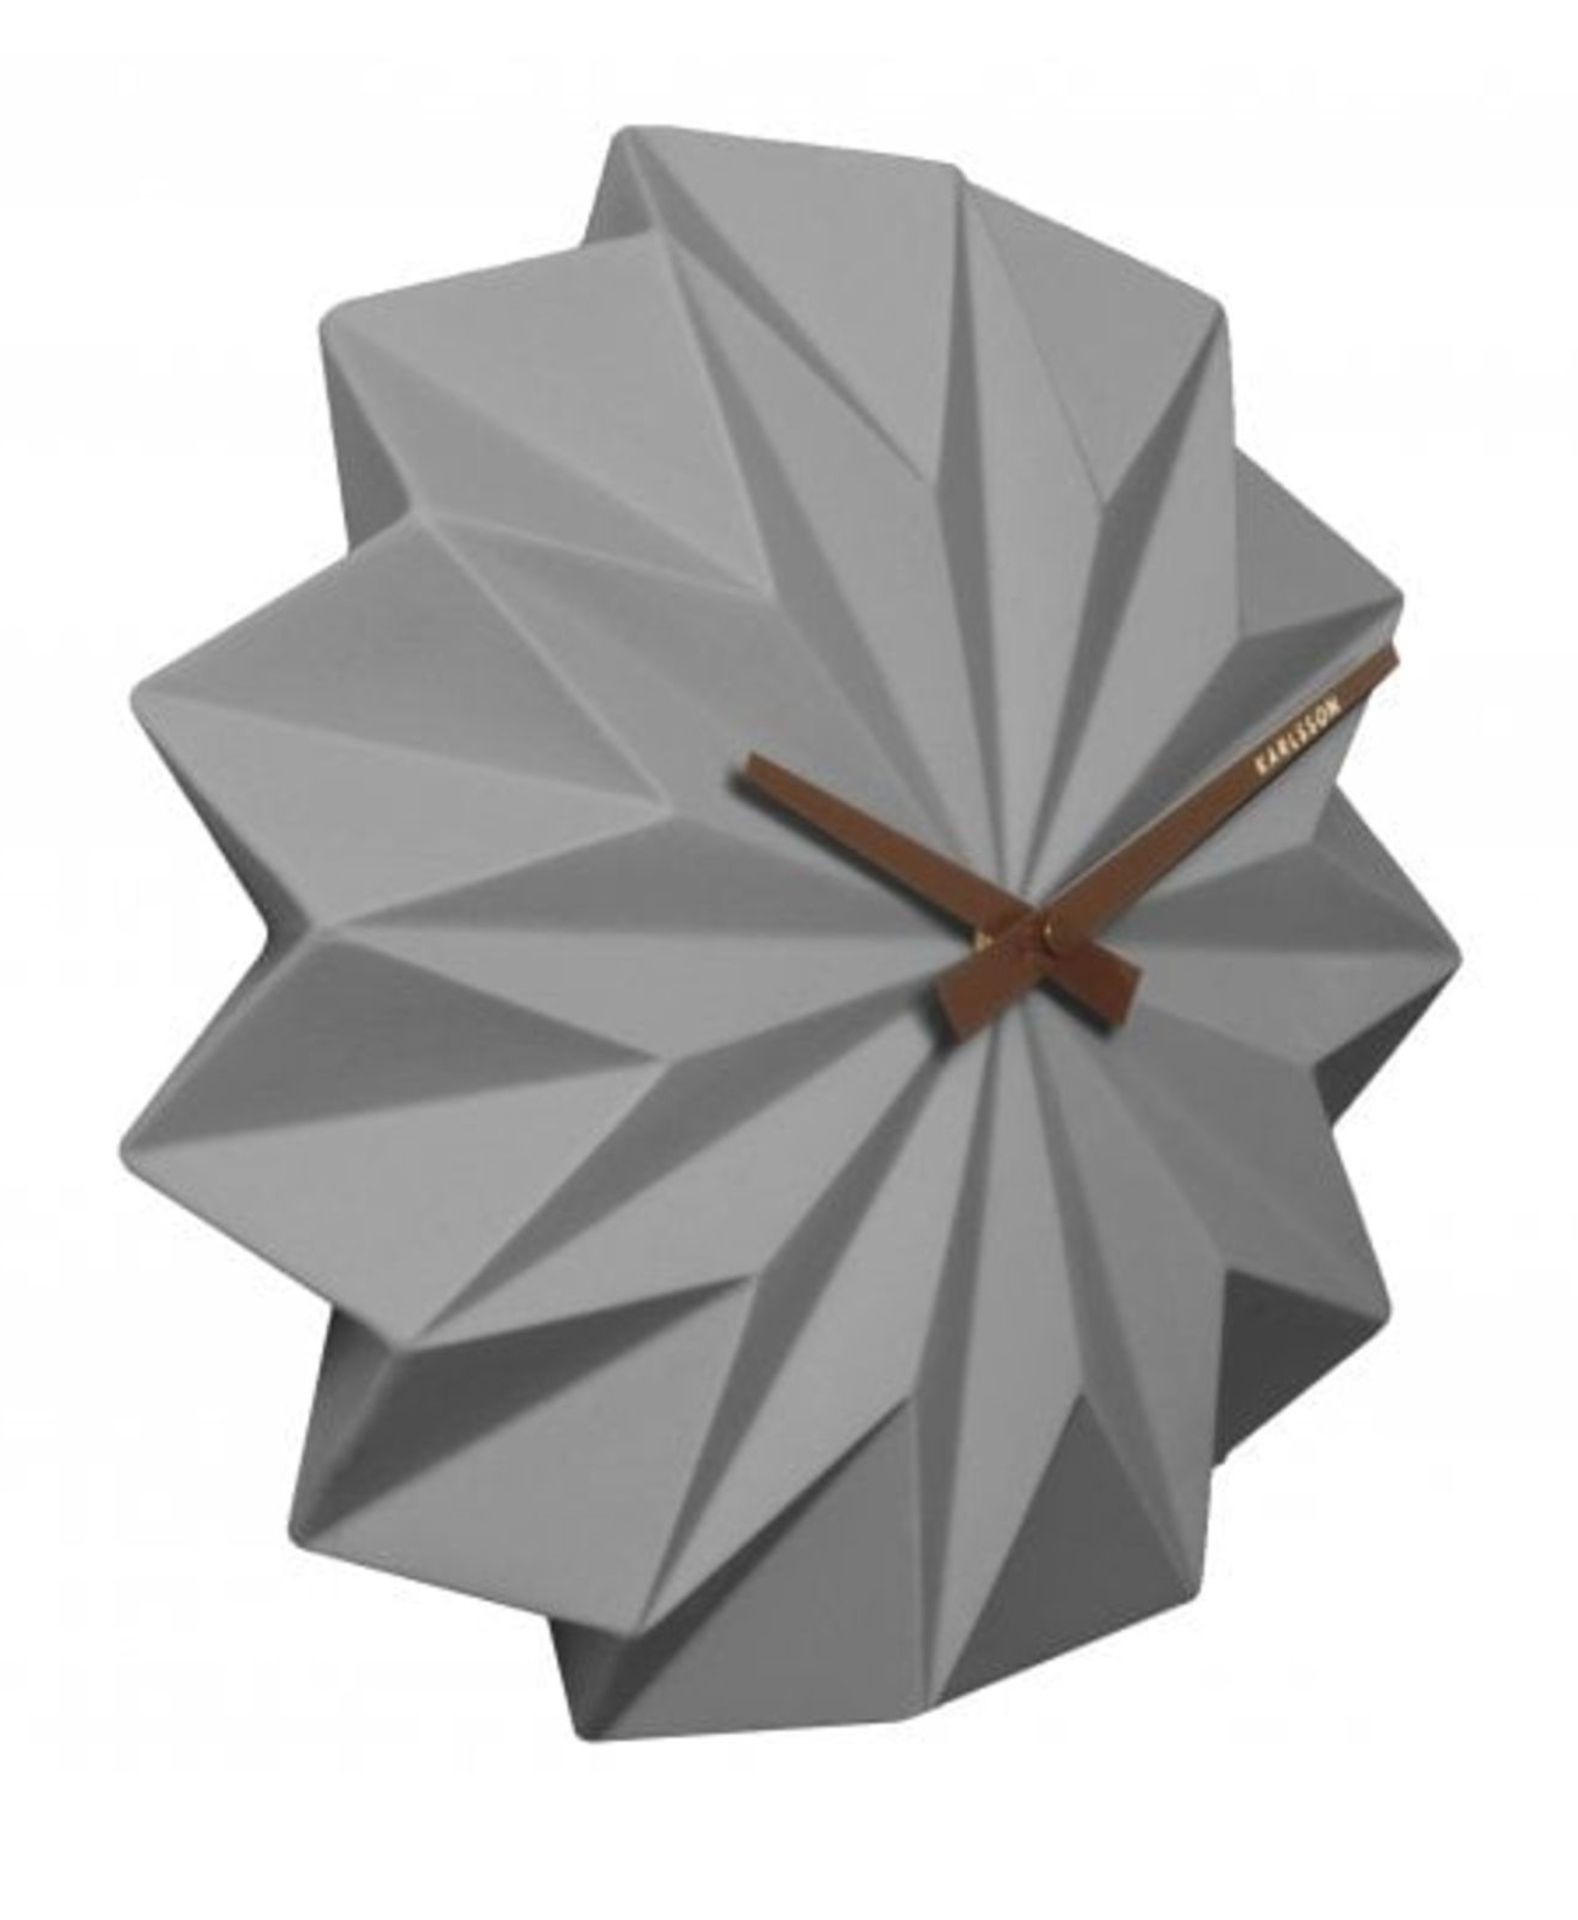 1 x Karlsson Origami Wall Clock - Ceramic Wall Clock in Grey With 27 cms Diameter - Brand New and - Image 2 of 3